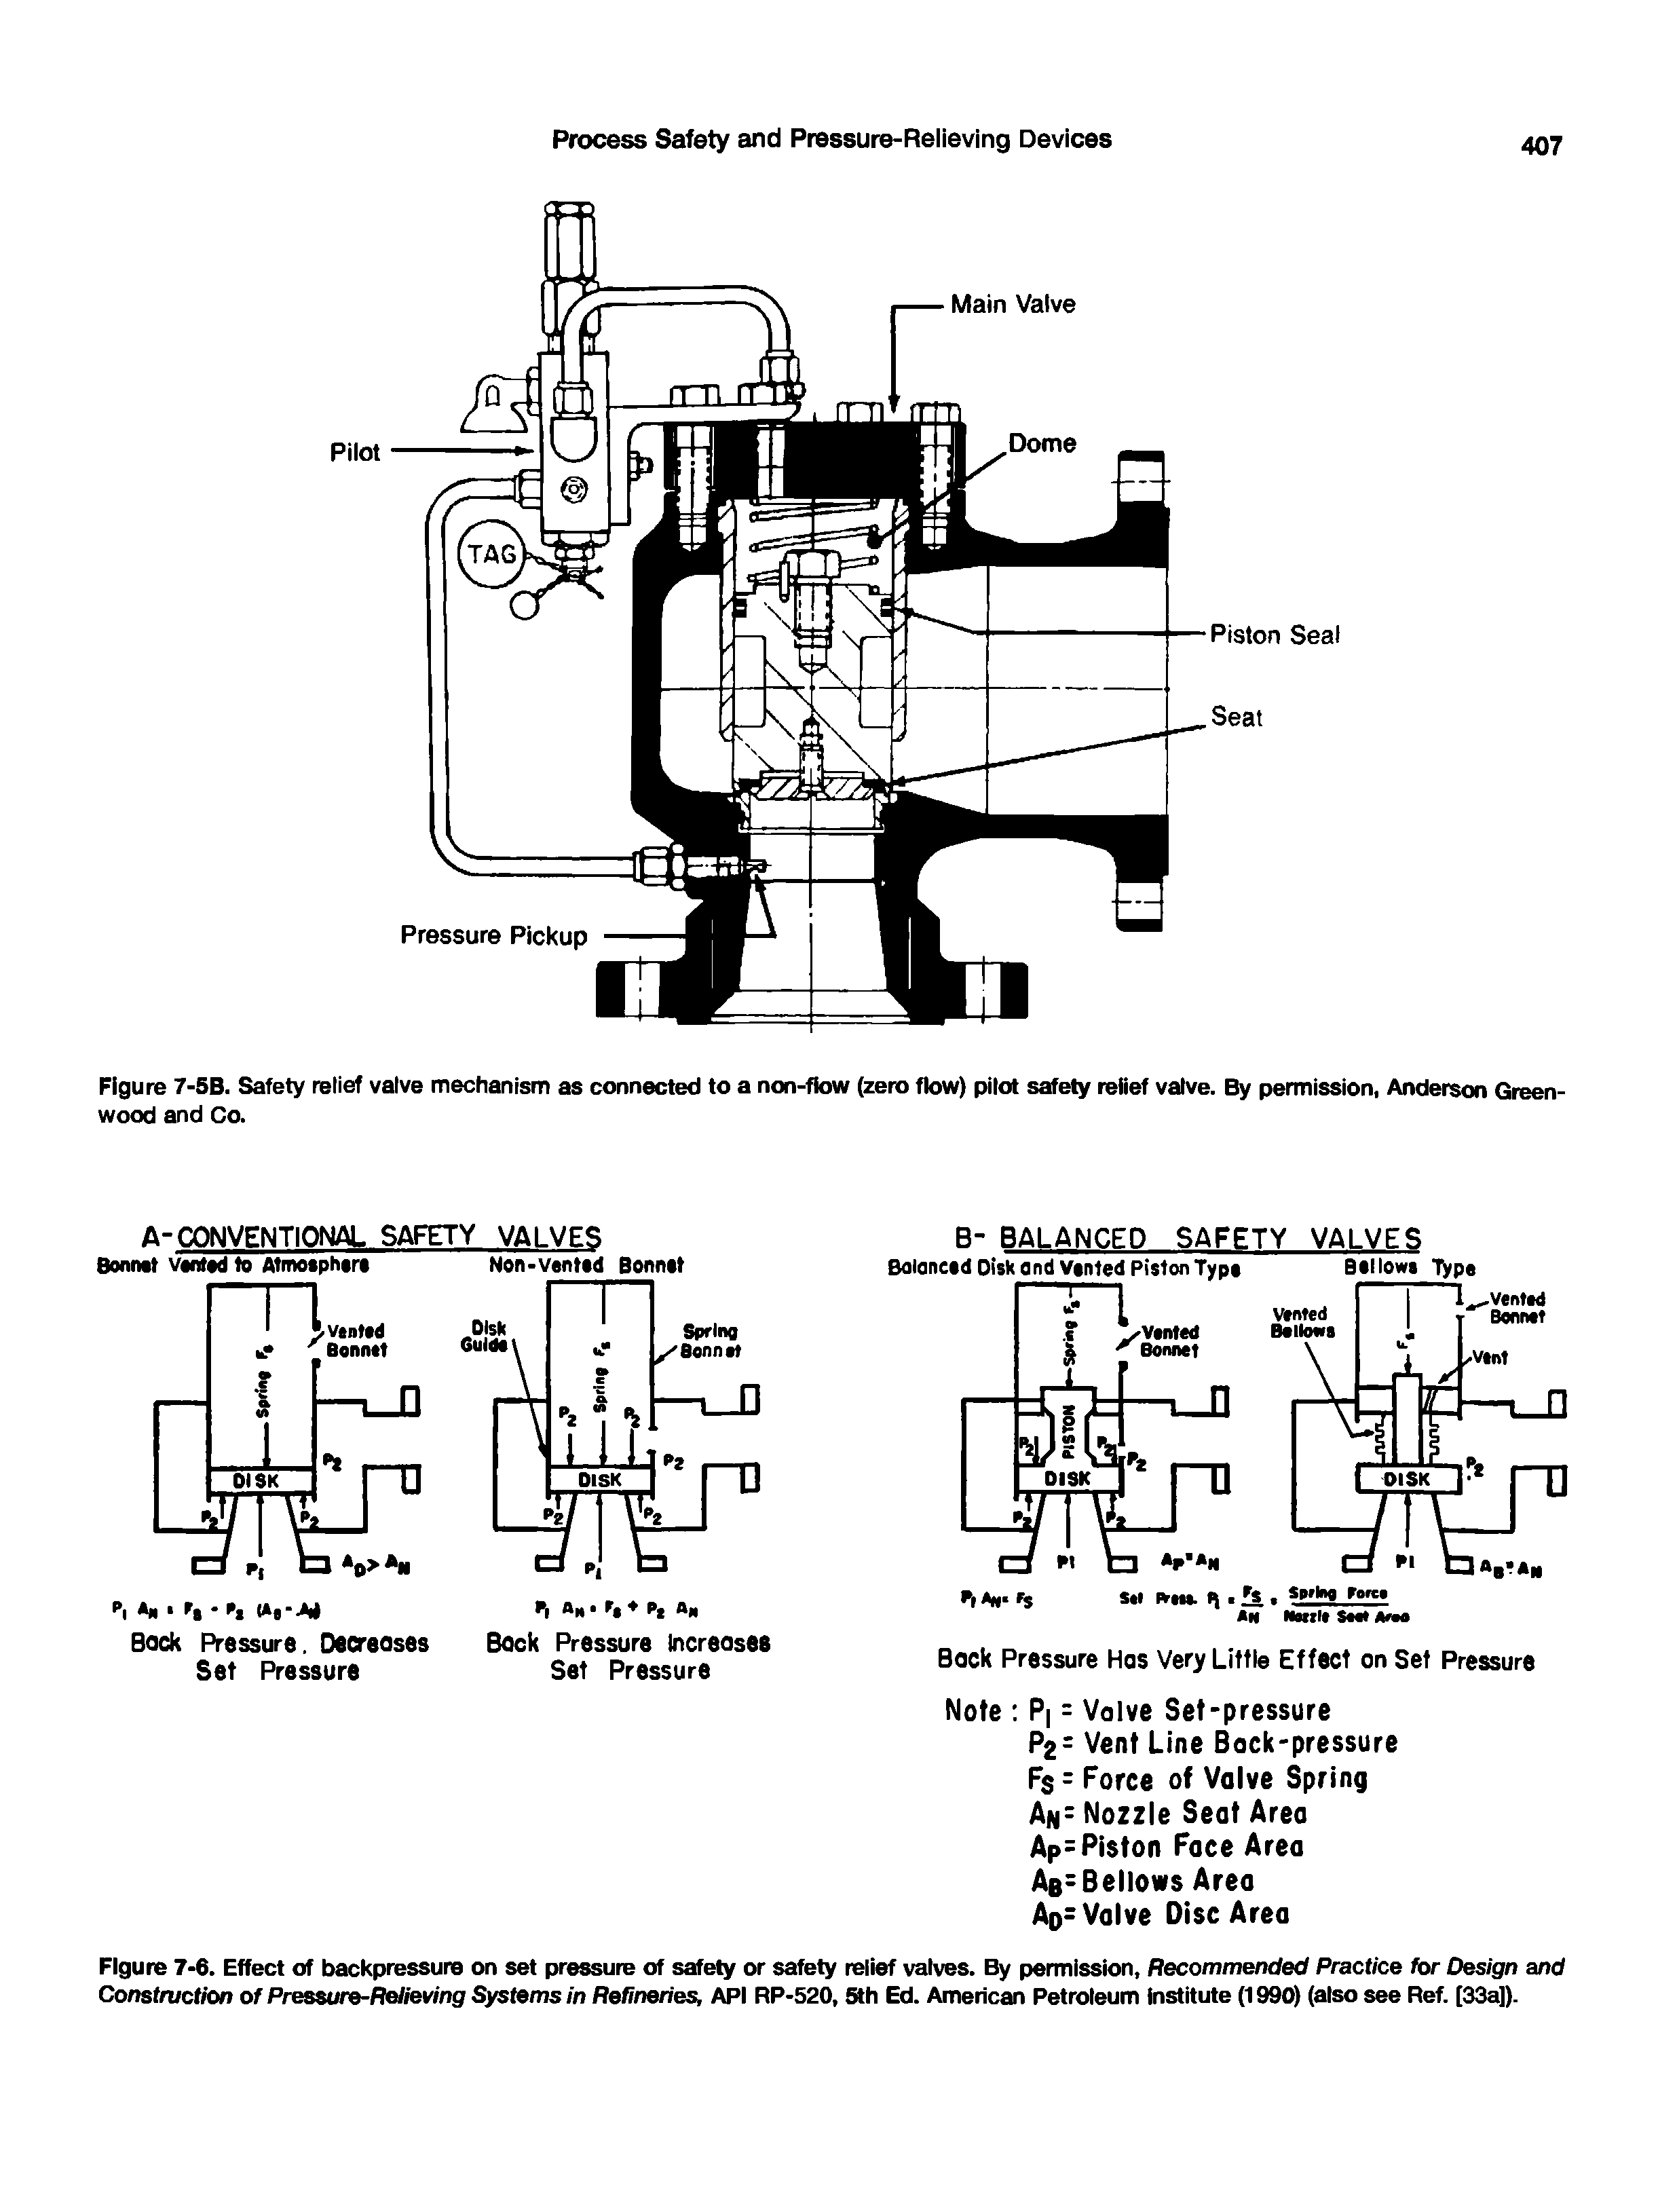 Figure 7-6. Effect of backpressure on set pressure of safety or safety relief valves. By permission, Recommended Practice for Design and Construction of Pressure-Relieving Systems in Refineries, API RP-520, 5th Ed. American Petroleum Institute (1990) (also see Ref. [33a]).